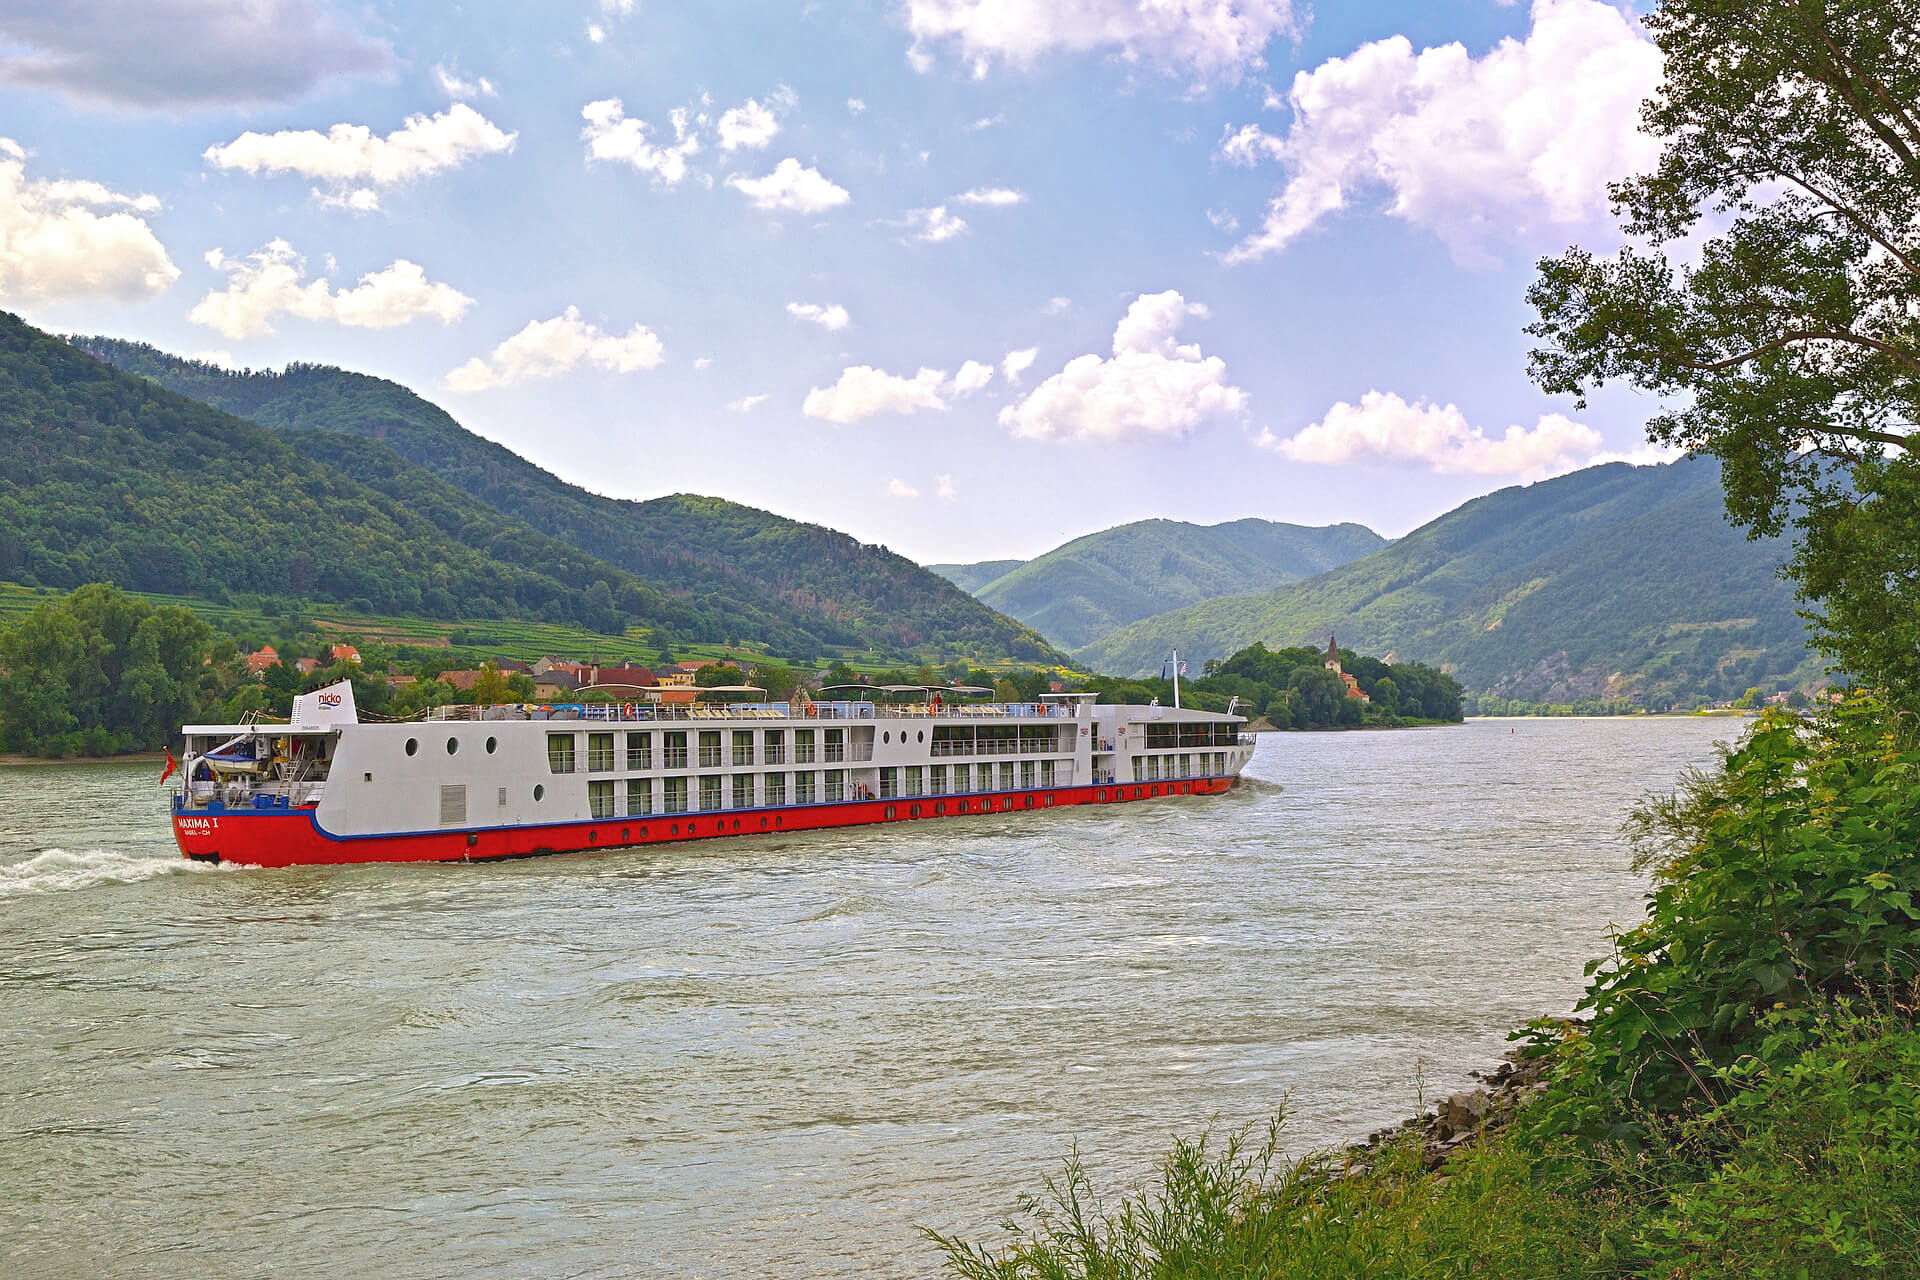 A river cruise ship traveling on the Danube River